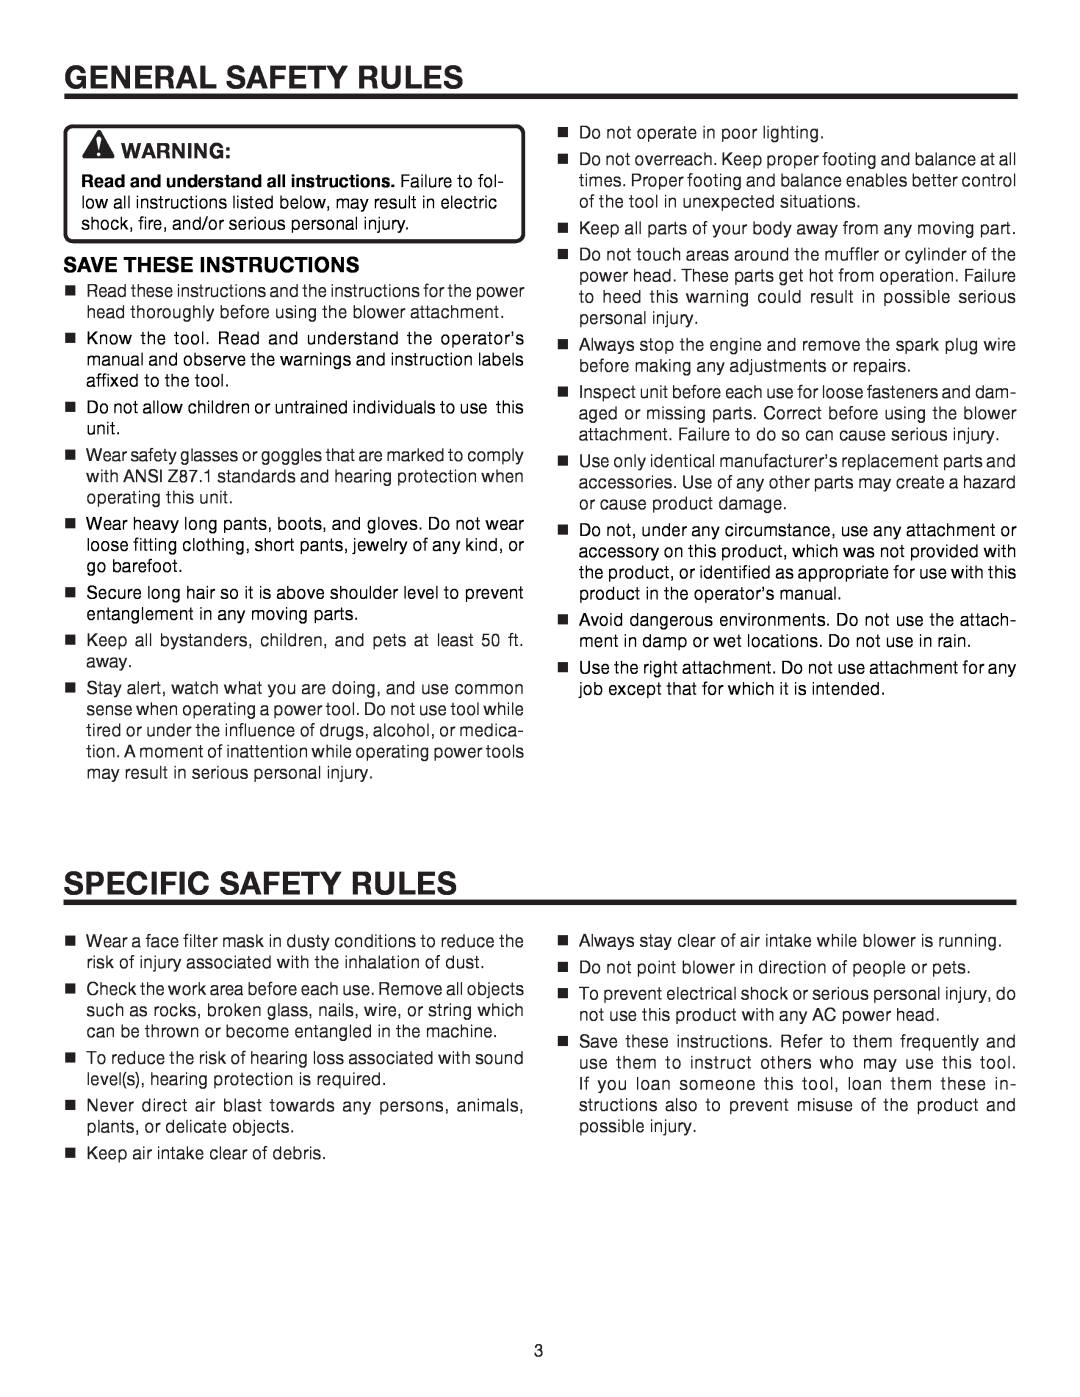 Ryobi UT15519E manual General Safety Rules, Specific Safety Rules, Save These Instructions 